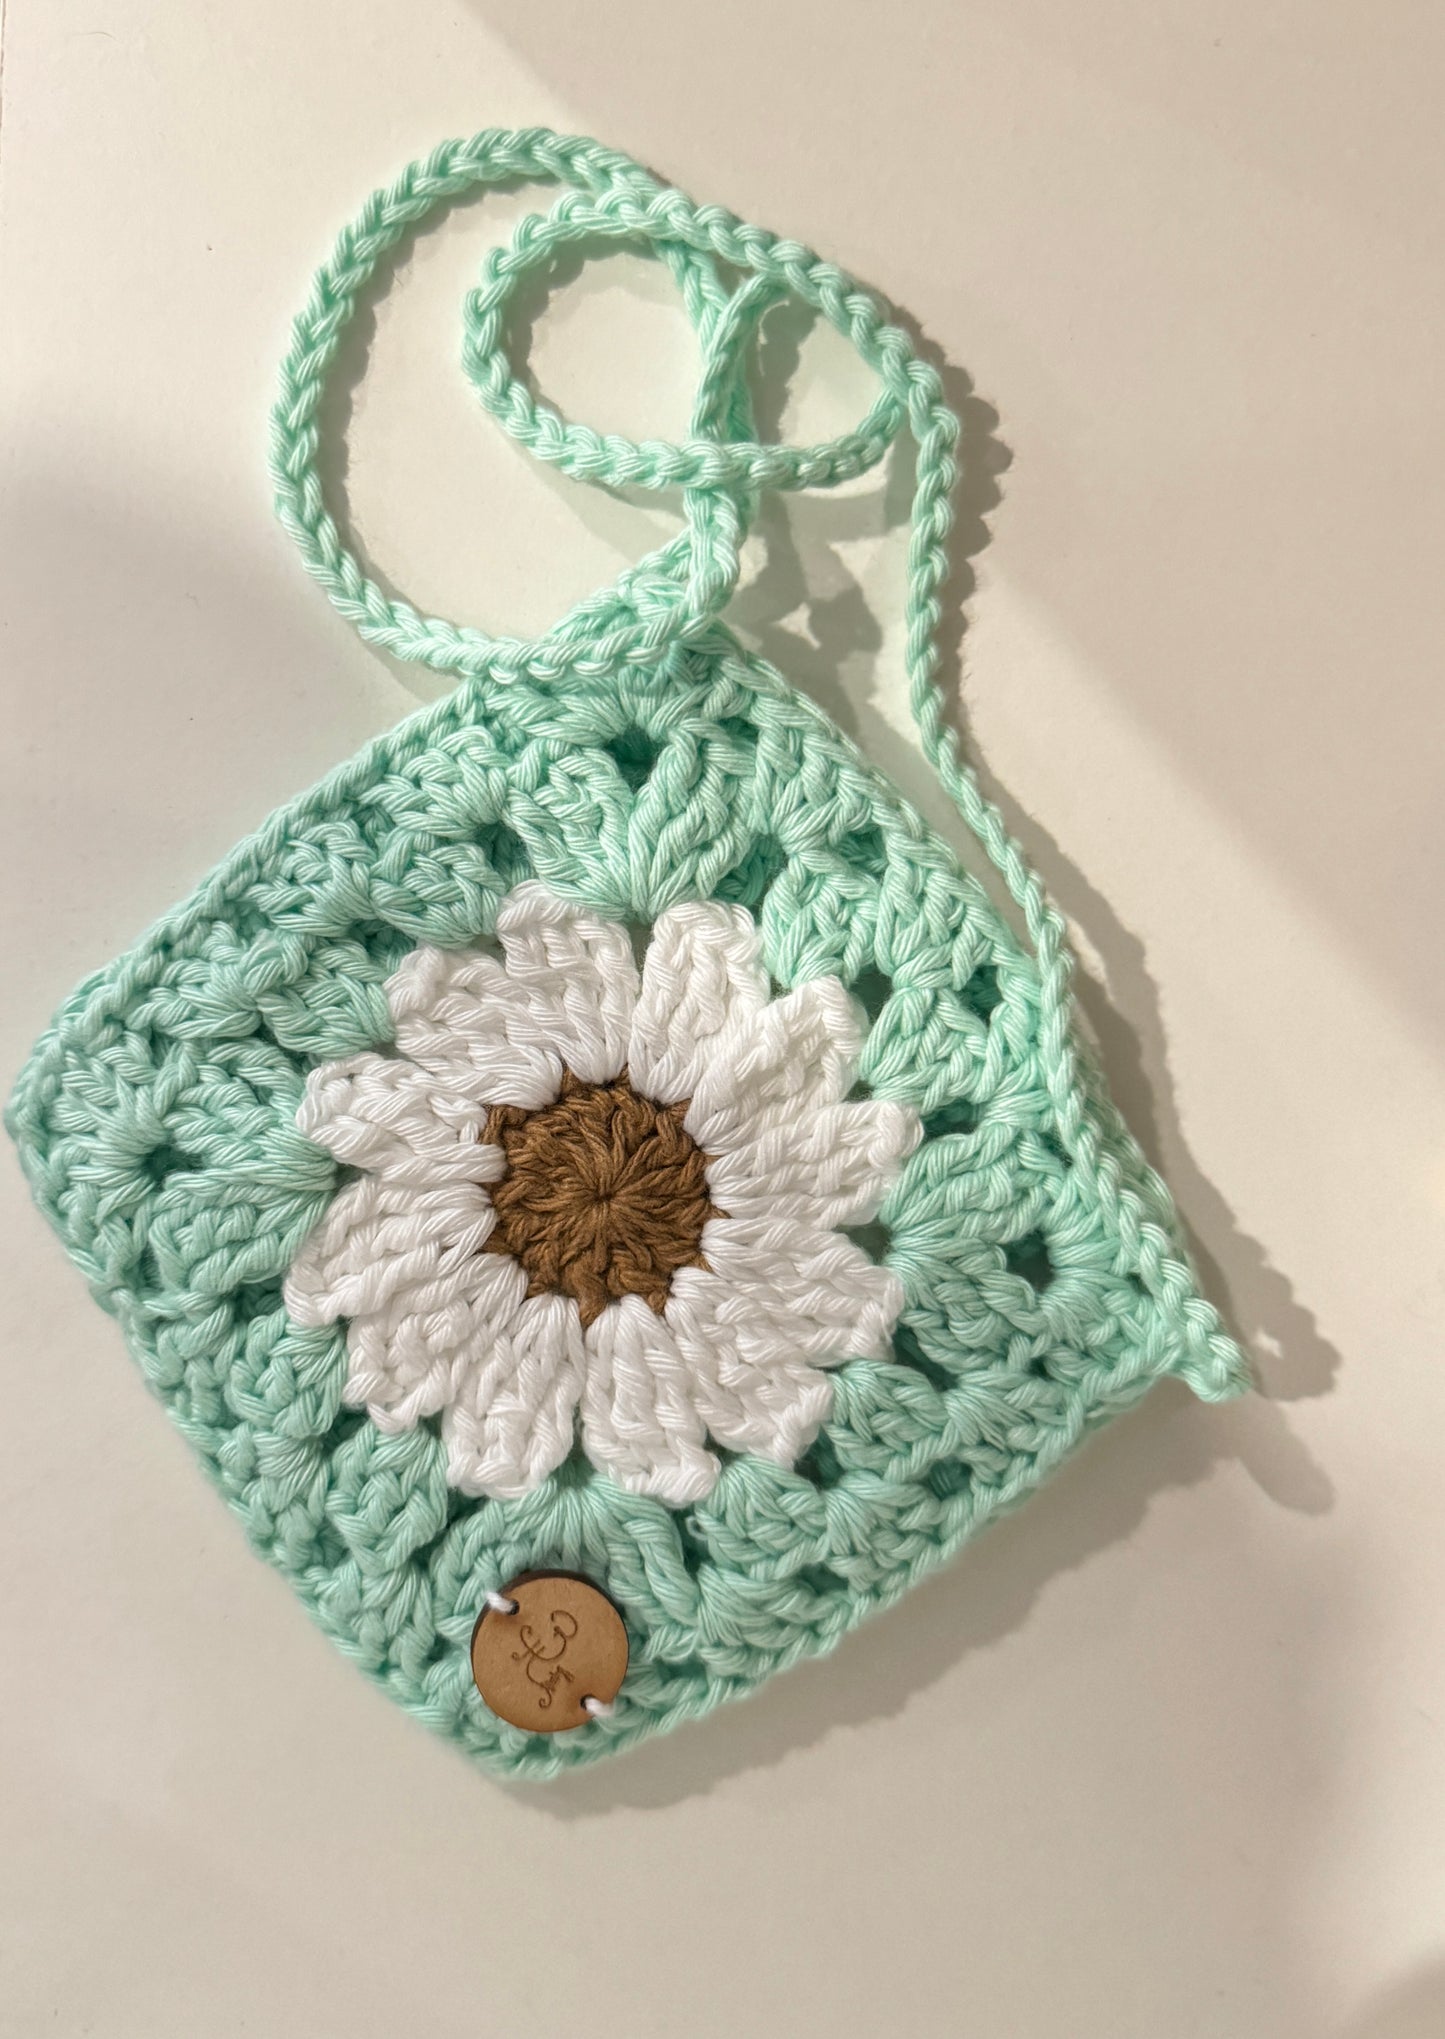 Daisy Granny Square Mini Bag Pouch ~ Teal, White and Brown